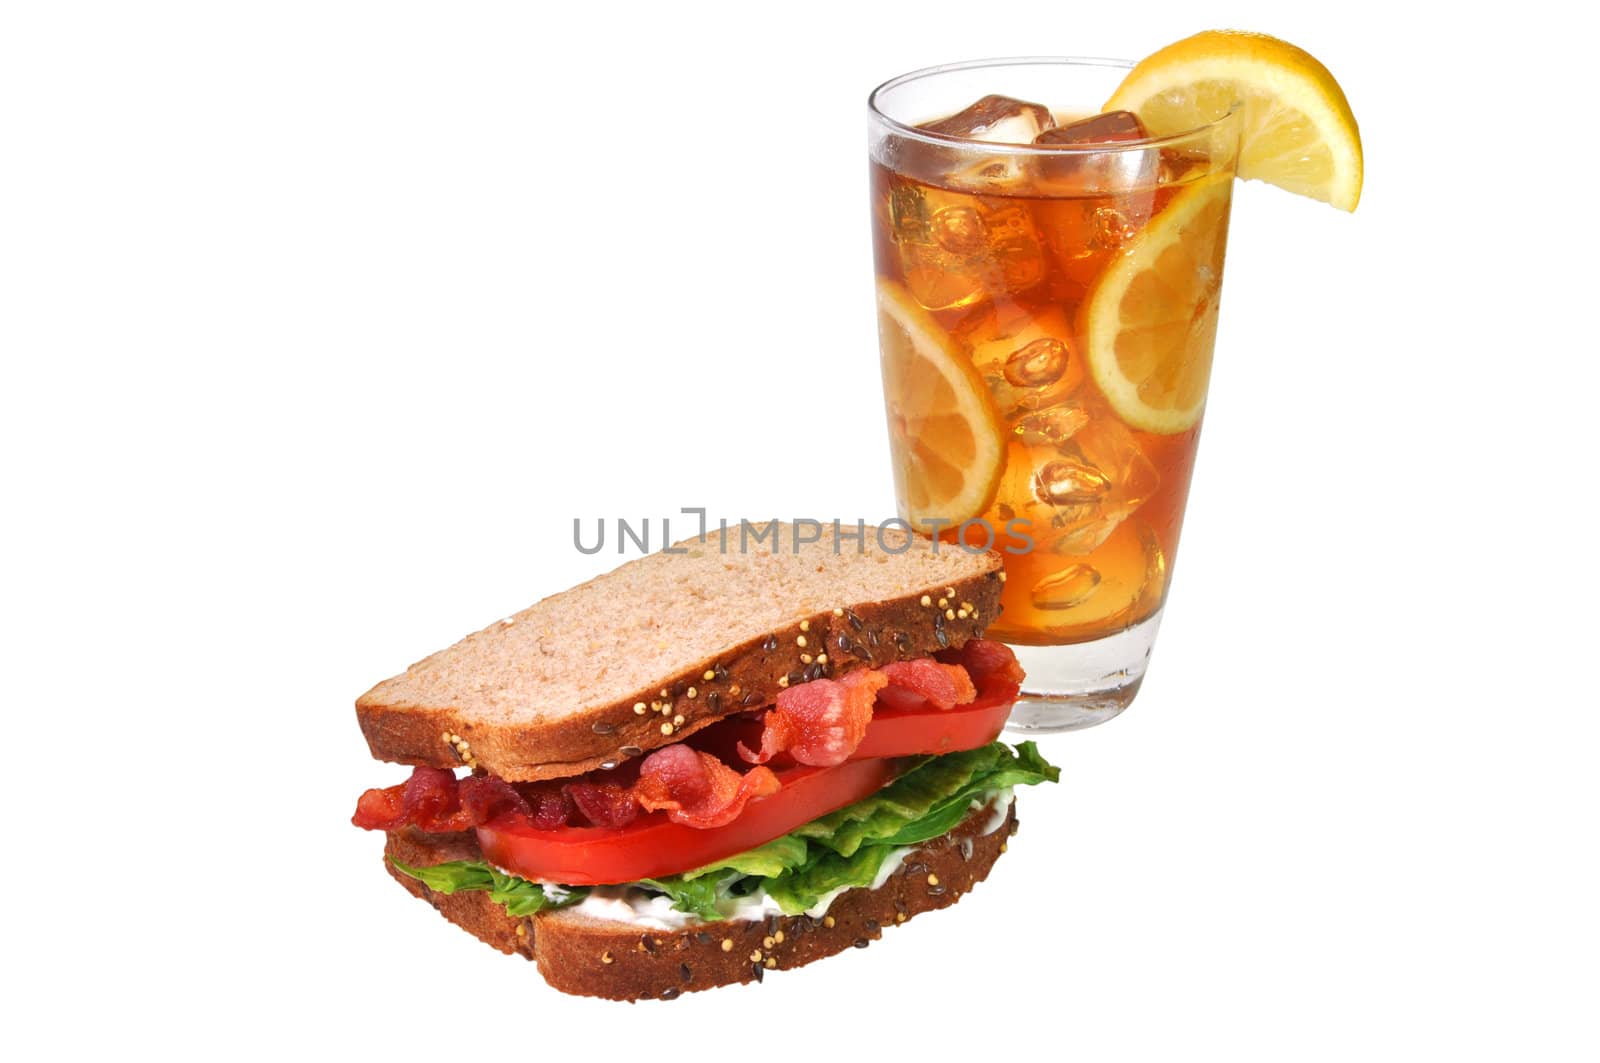 BLT Sandwich, Iced Tea, Isolated, Clipping Path by dehooks